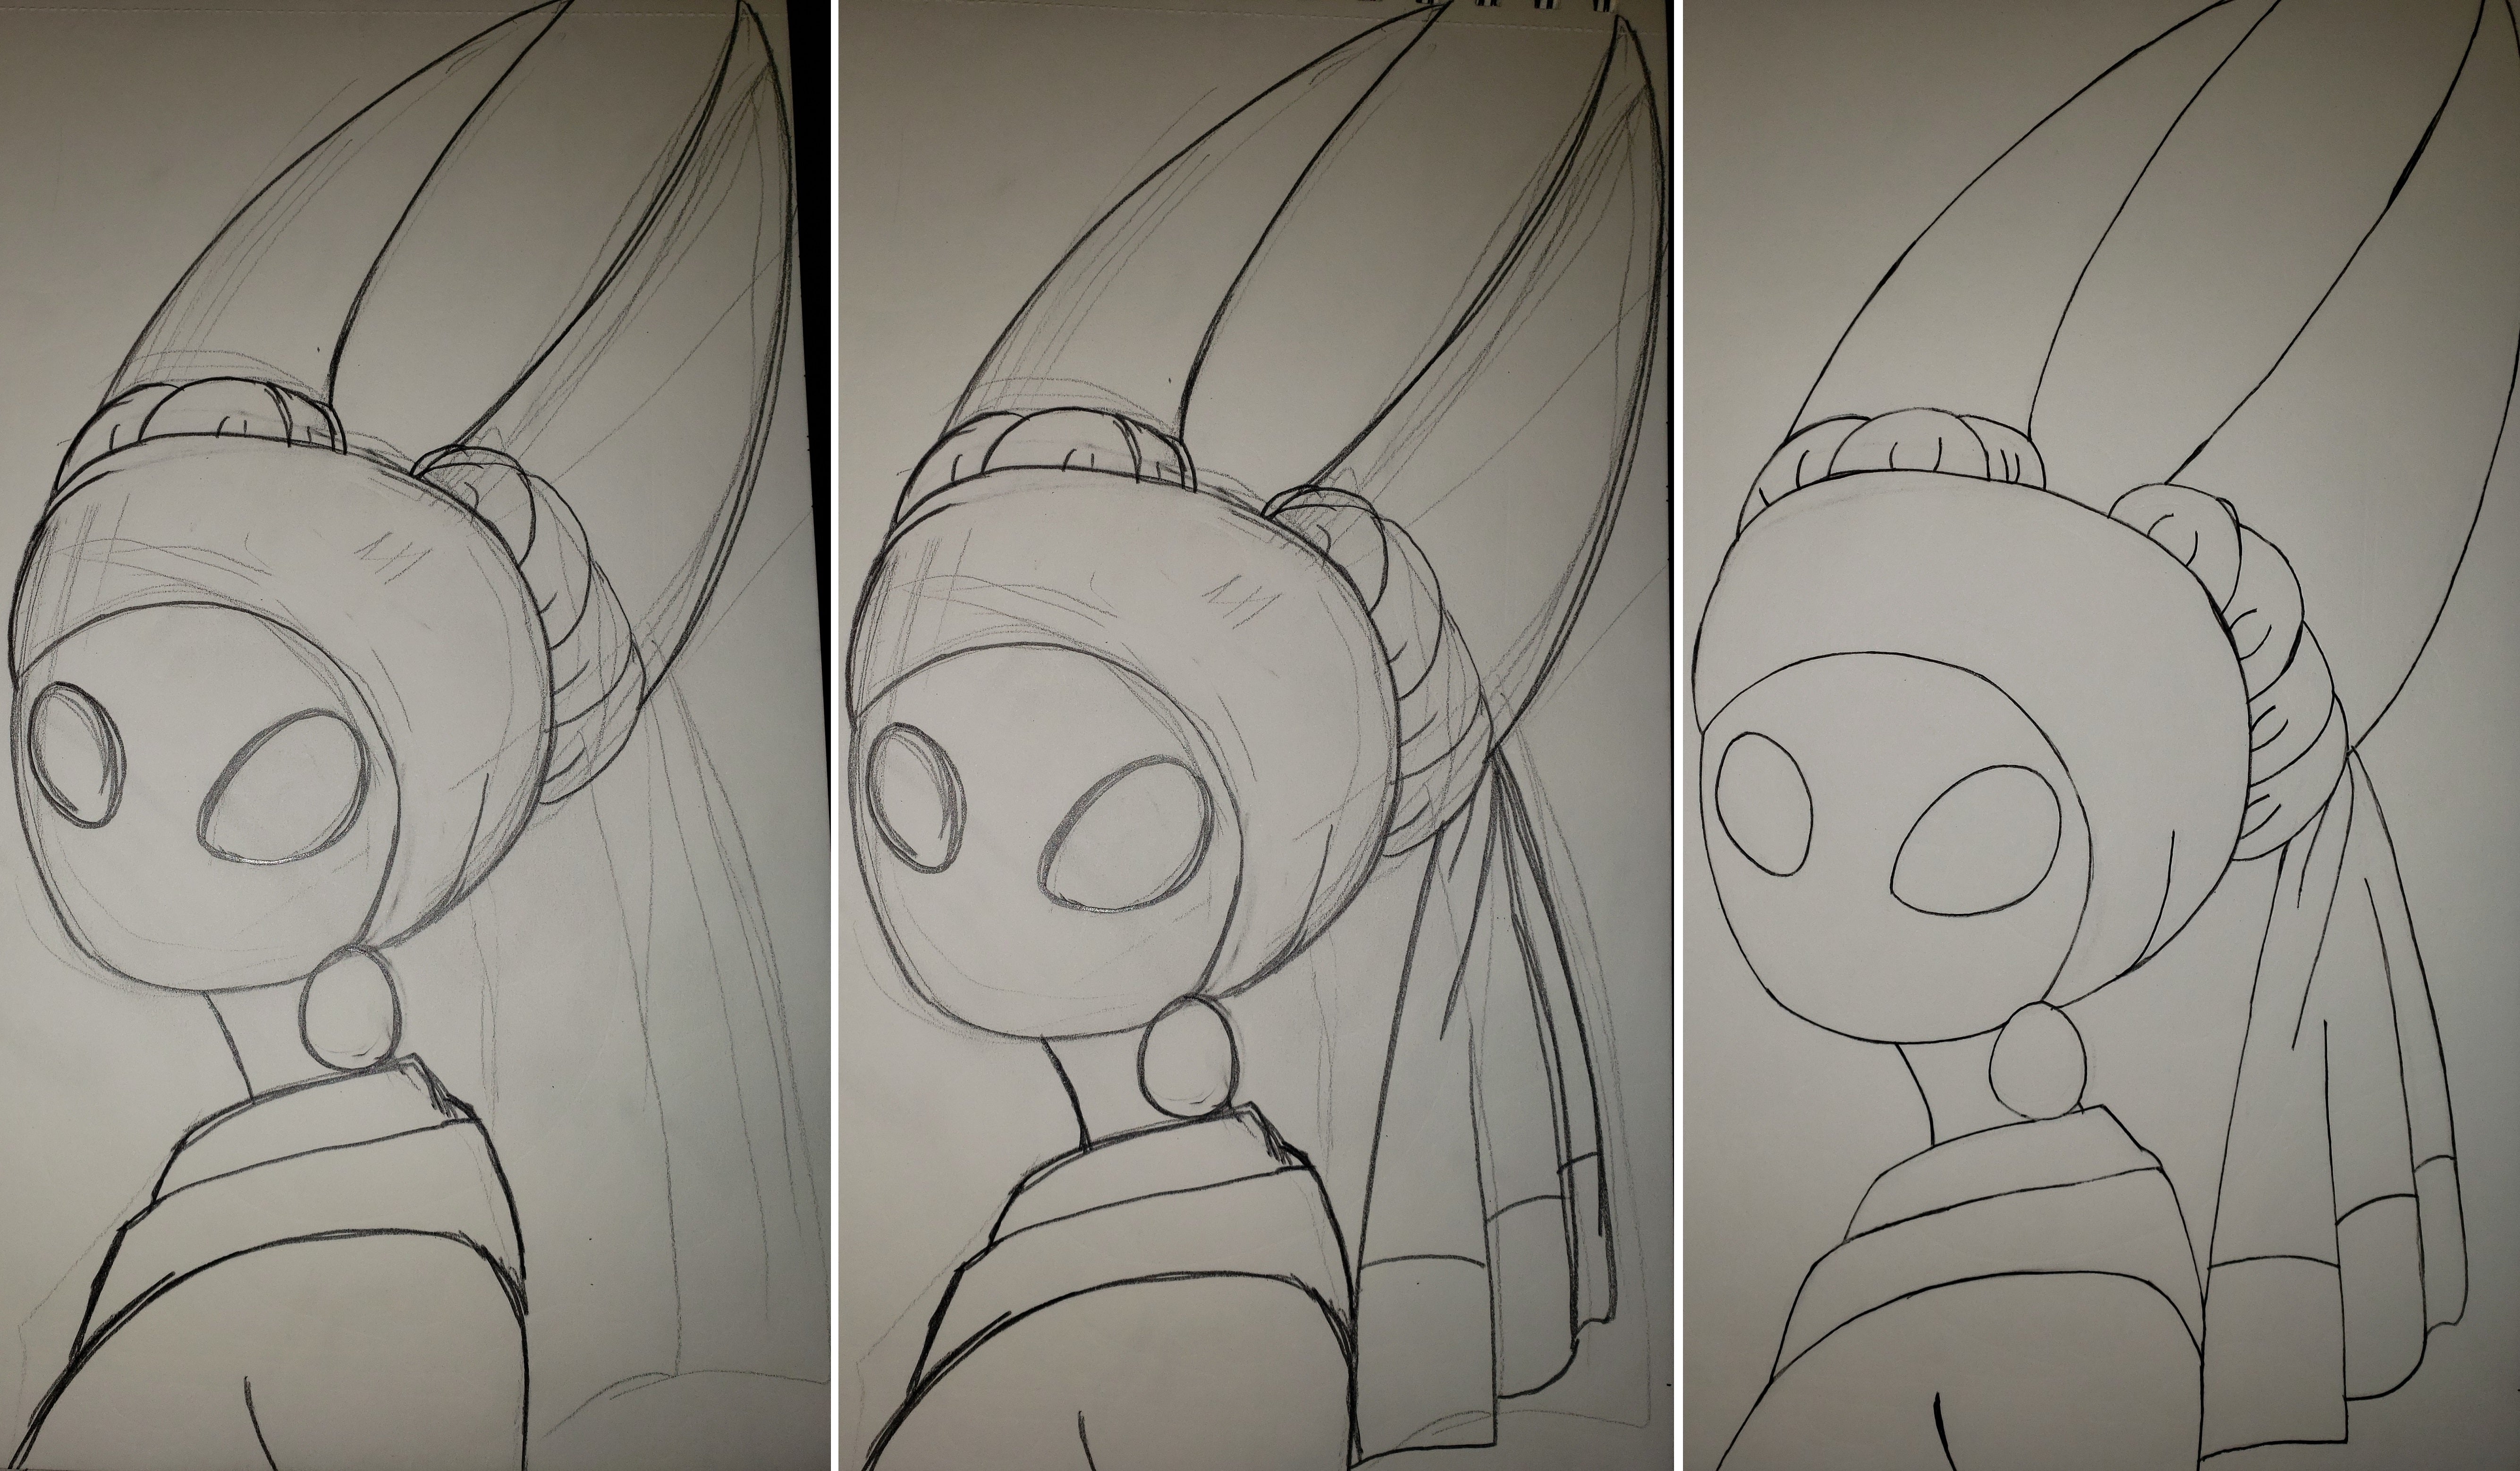 artsy sister, the hollow knight silksong, the girl with a pearl earring parody